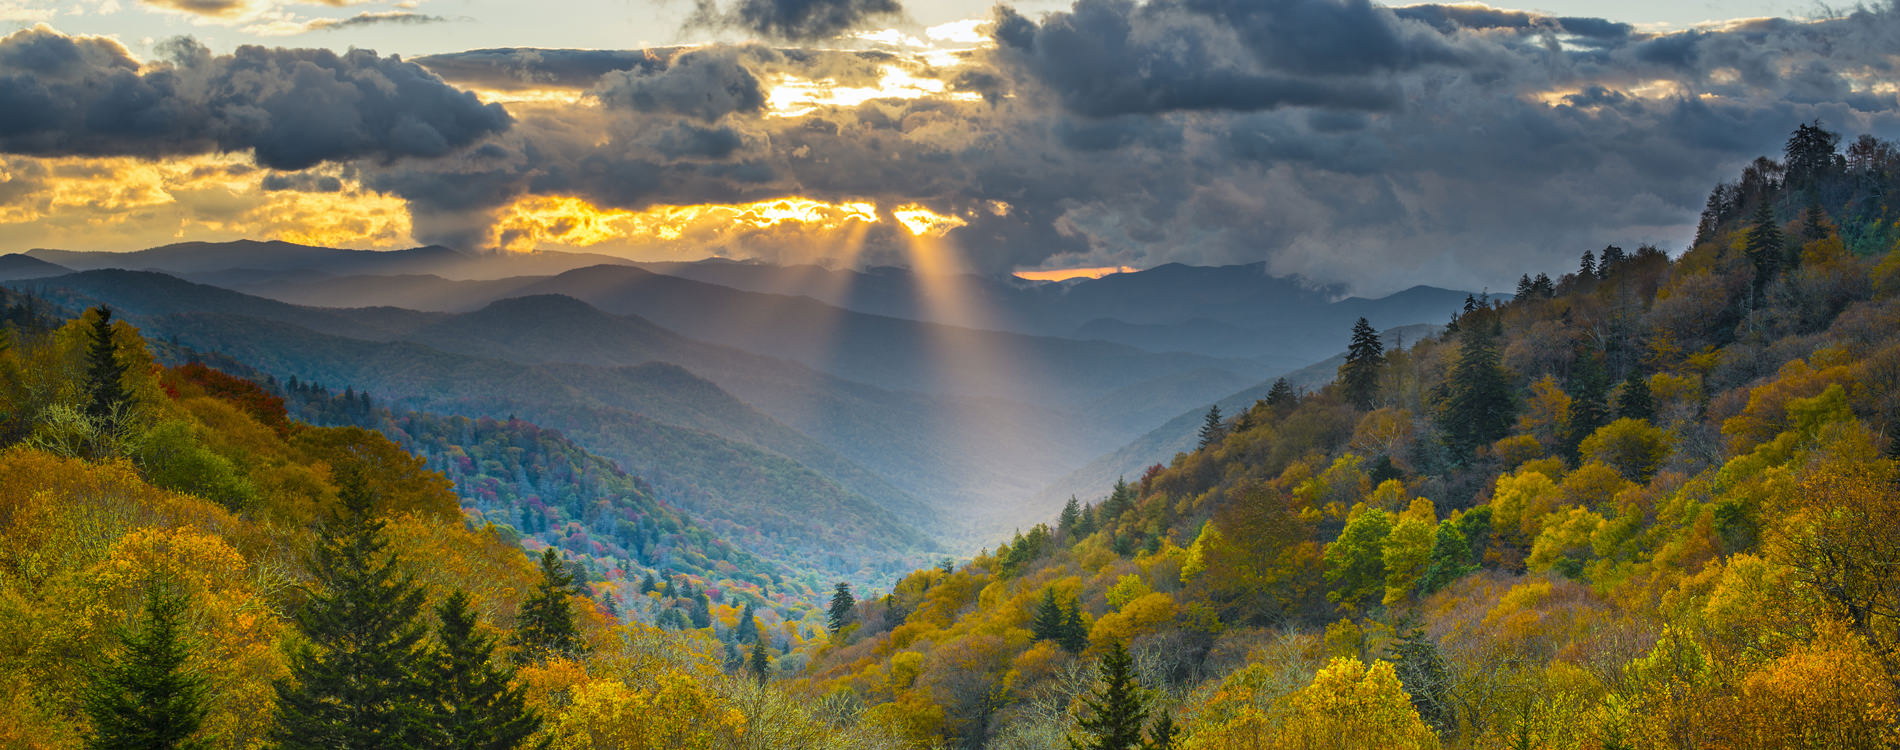 Sunrise in Great Smoky Mountain National Park Tennessee